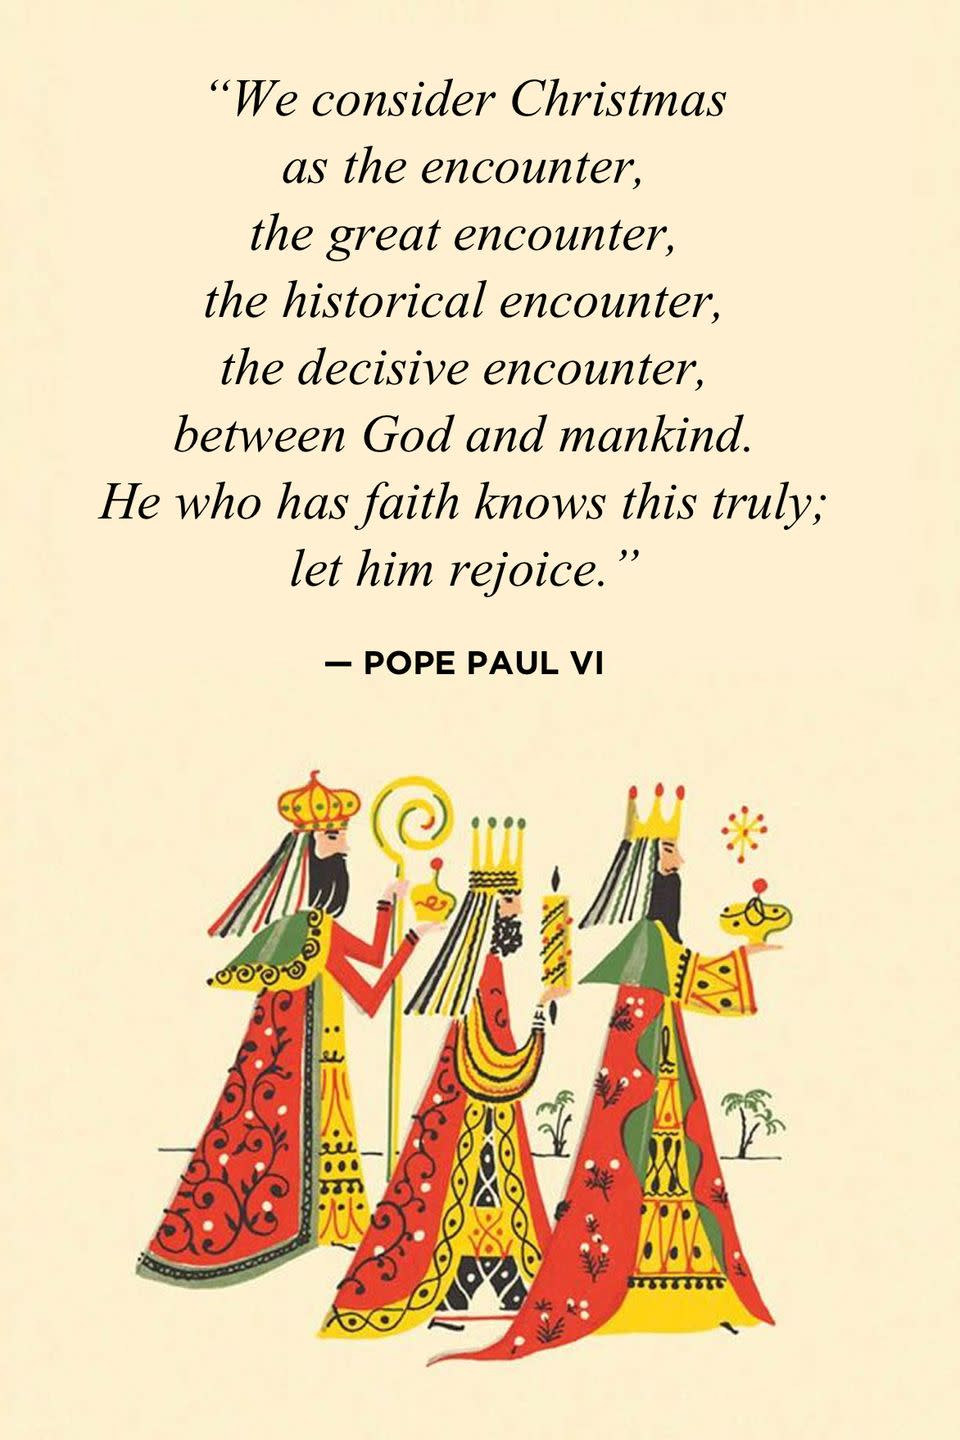 <p>"We consider Christmas as the encounter, the great encounter, the historical encounter, the decisive encounter, between God and mankind. He who has faith knows this truly; let him rejoice." </p>